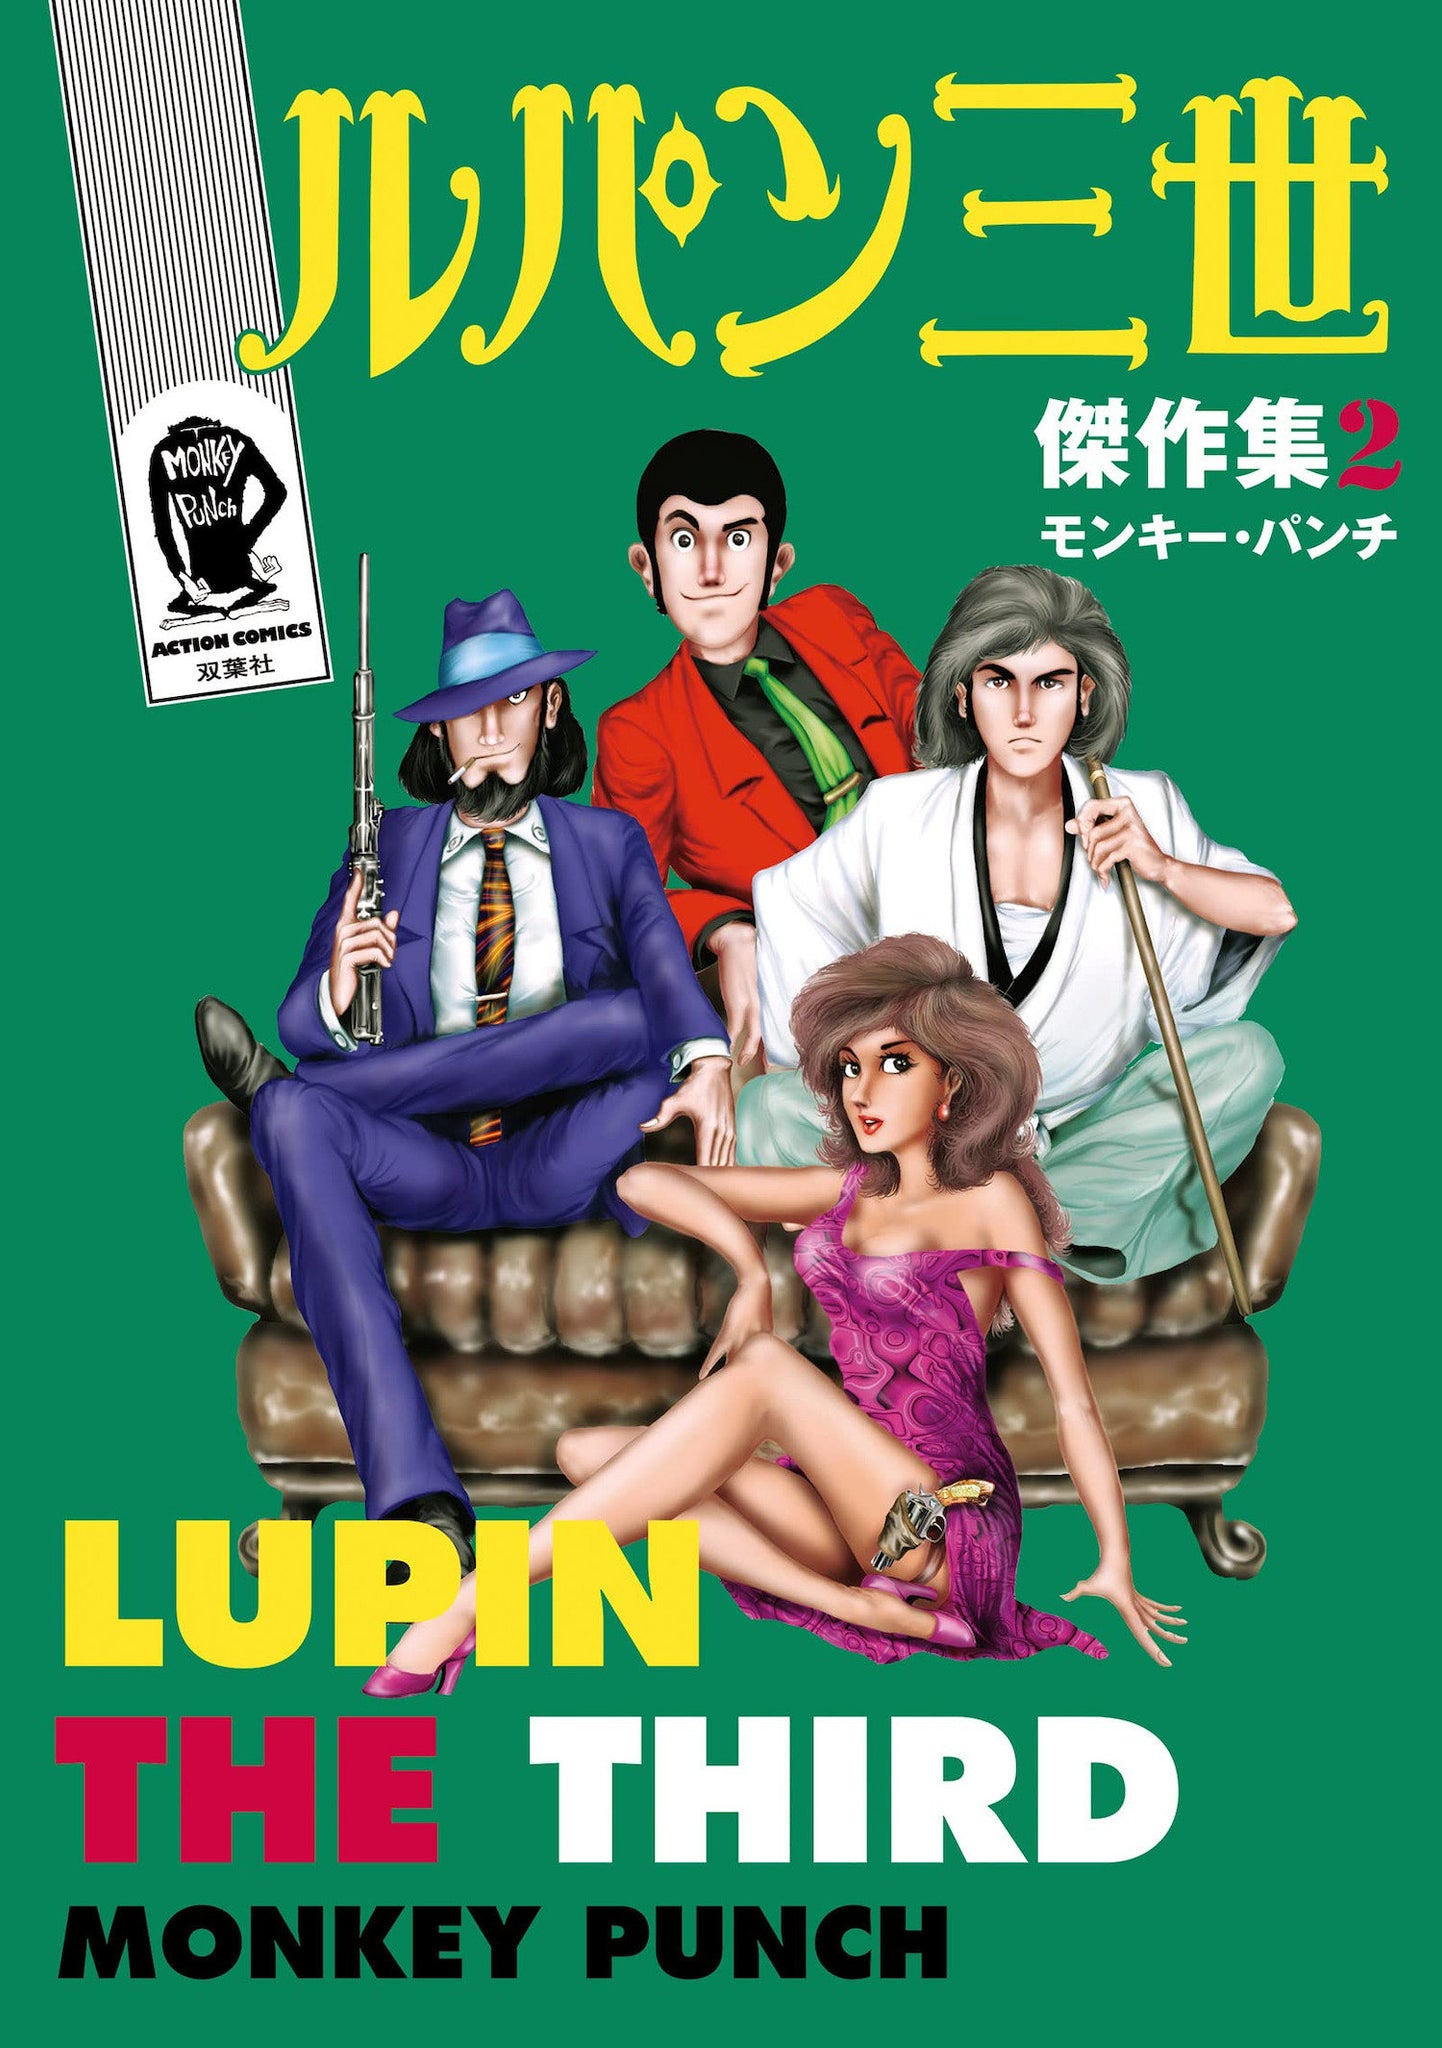 Lupin III (Lupin the 3rd): Thick as Thieves - The Classic Manga Collection